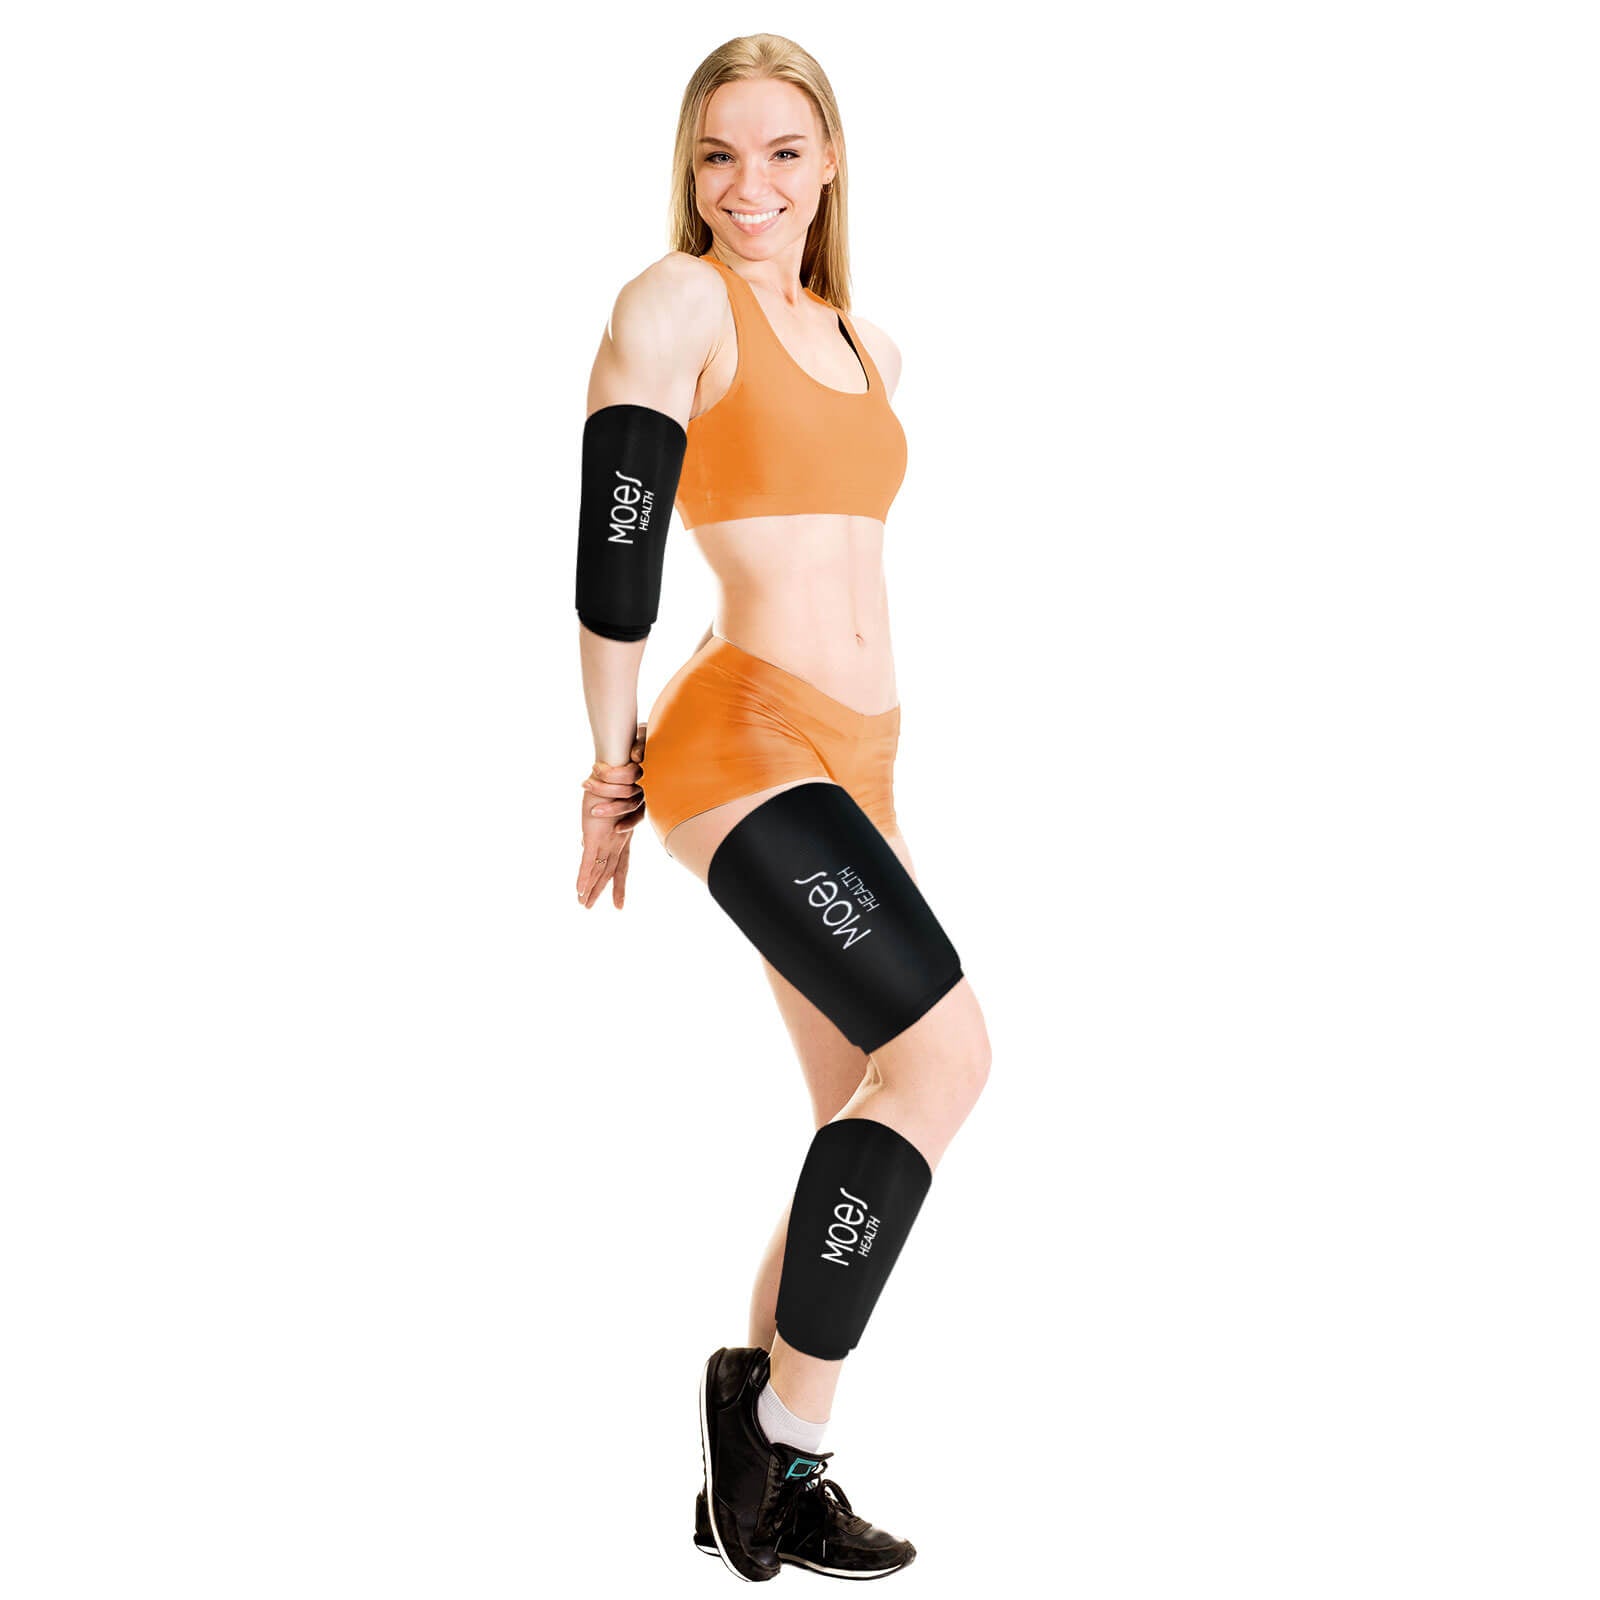 Dropship Relieve Knee, Shoulder & Elbow Pain With This Cordless